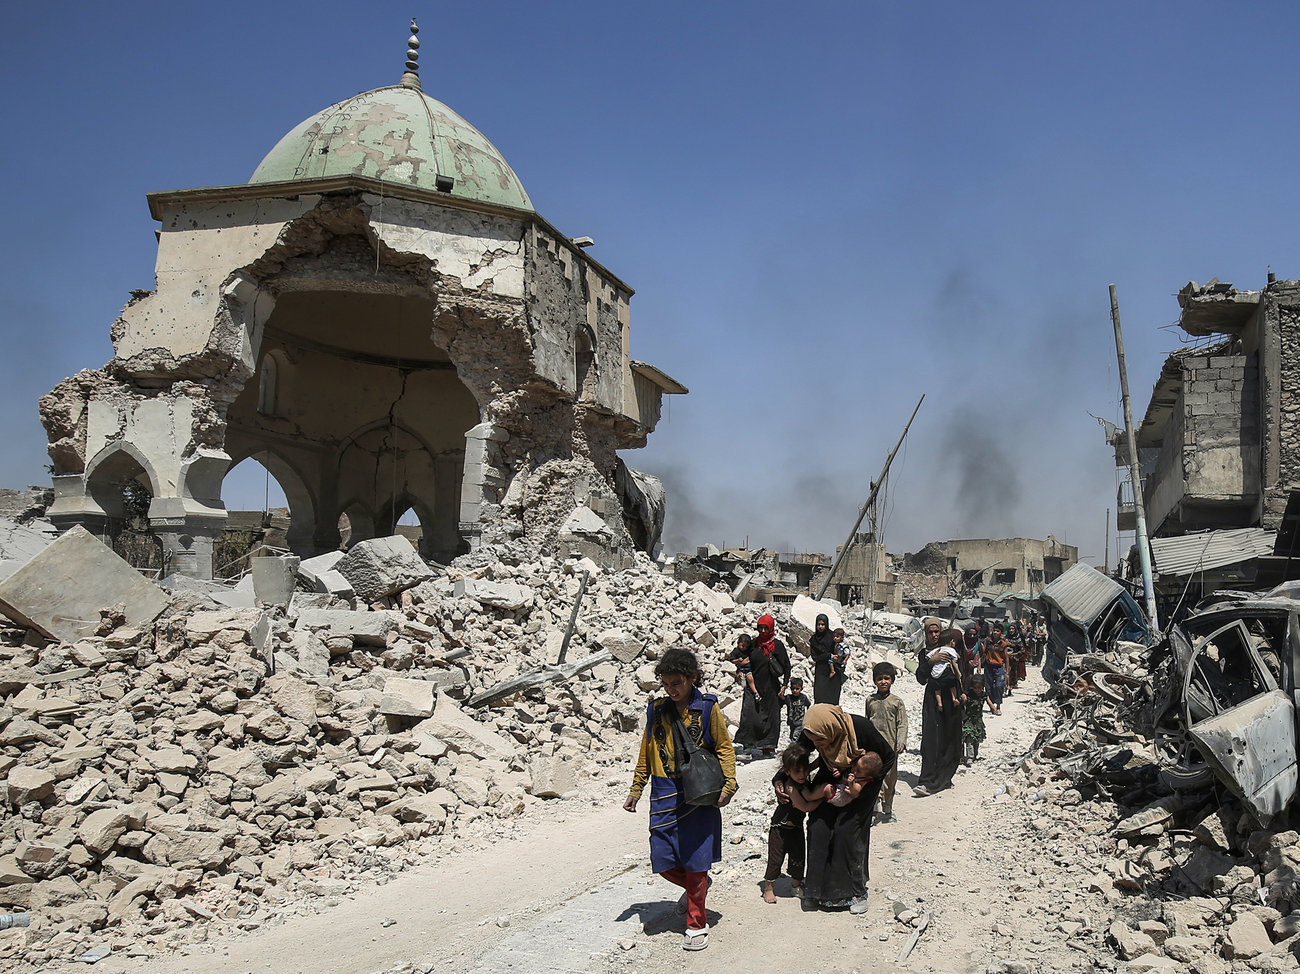 Mosul's Famed Mosque And 'Hunchback' Minaret, Destroyed By ISIS, Will Be Rebuilt